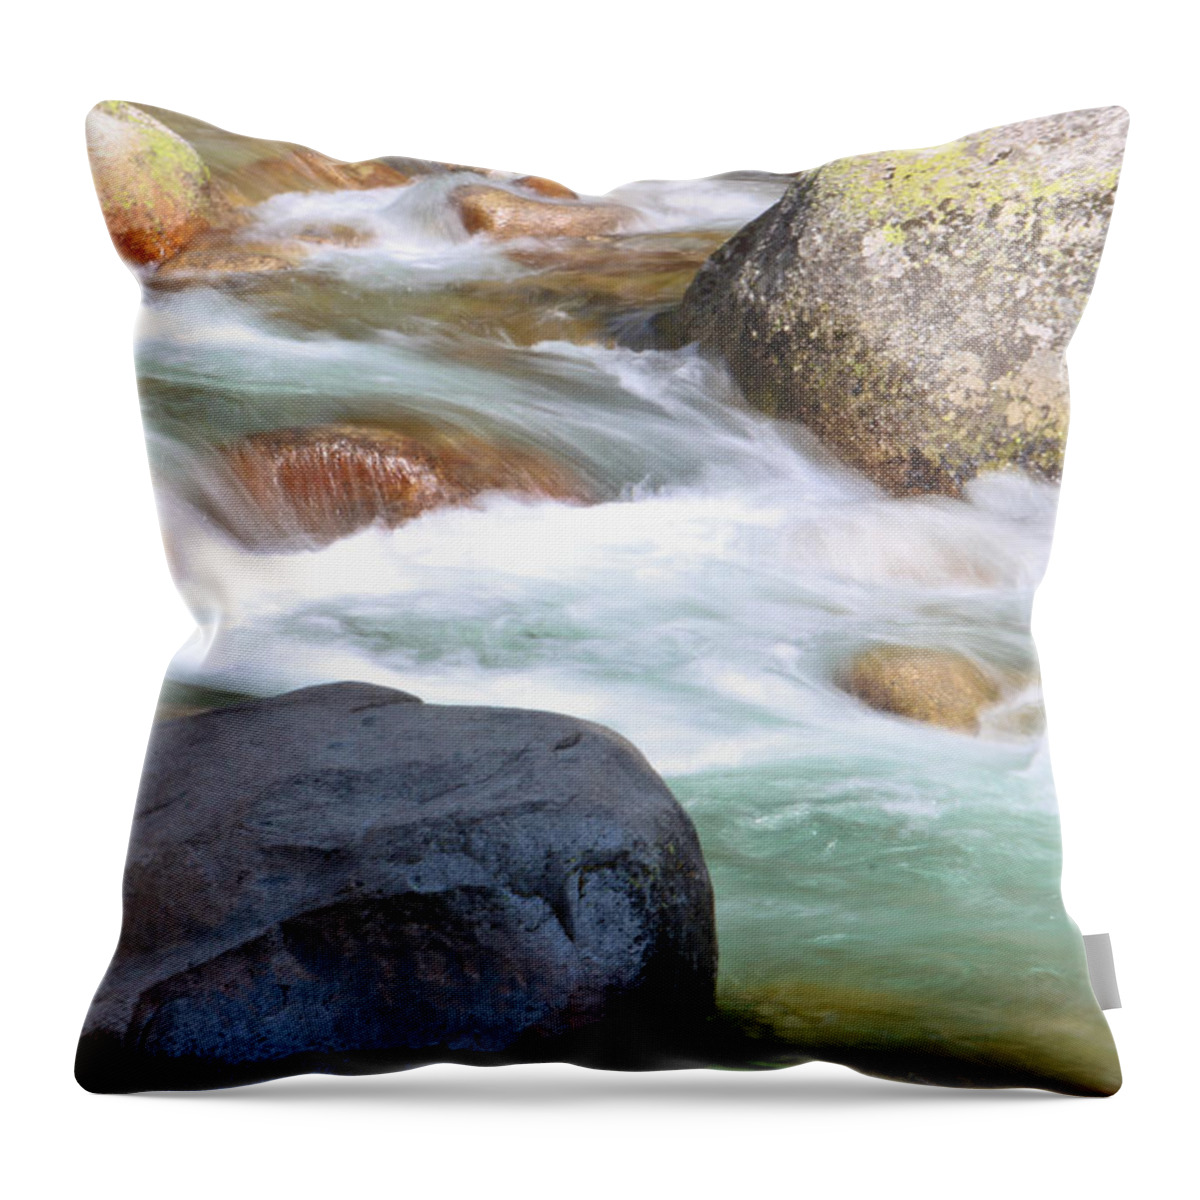 Sequoia National Park Throw Pillow featuring the photograph White Water by Heidi Smith